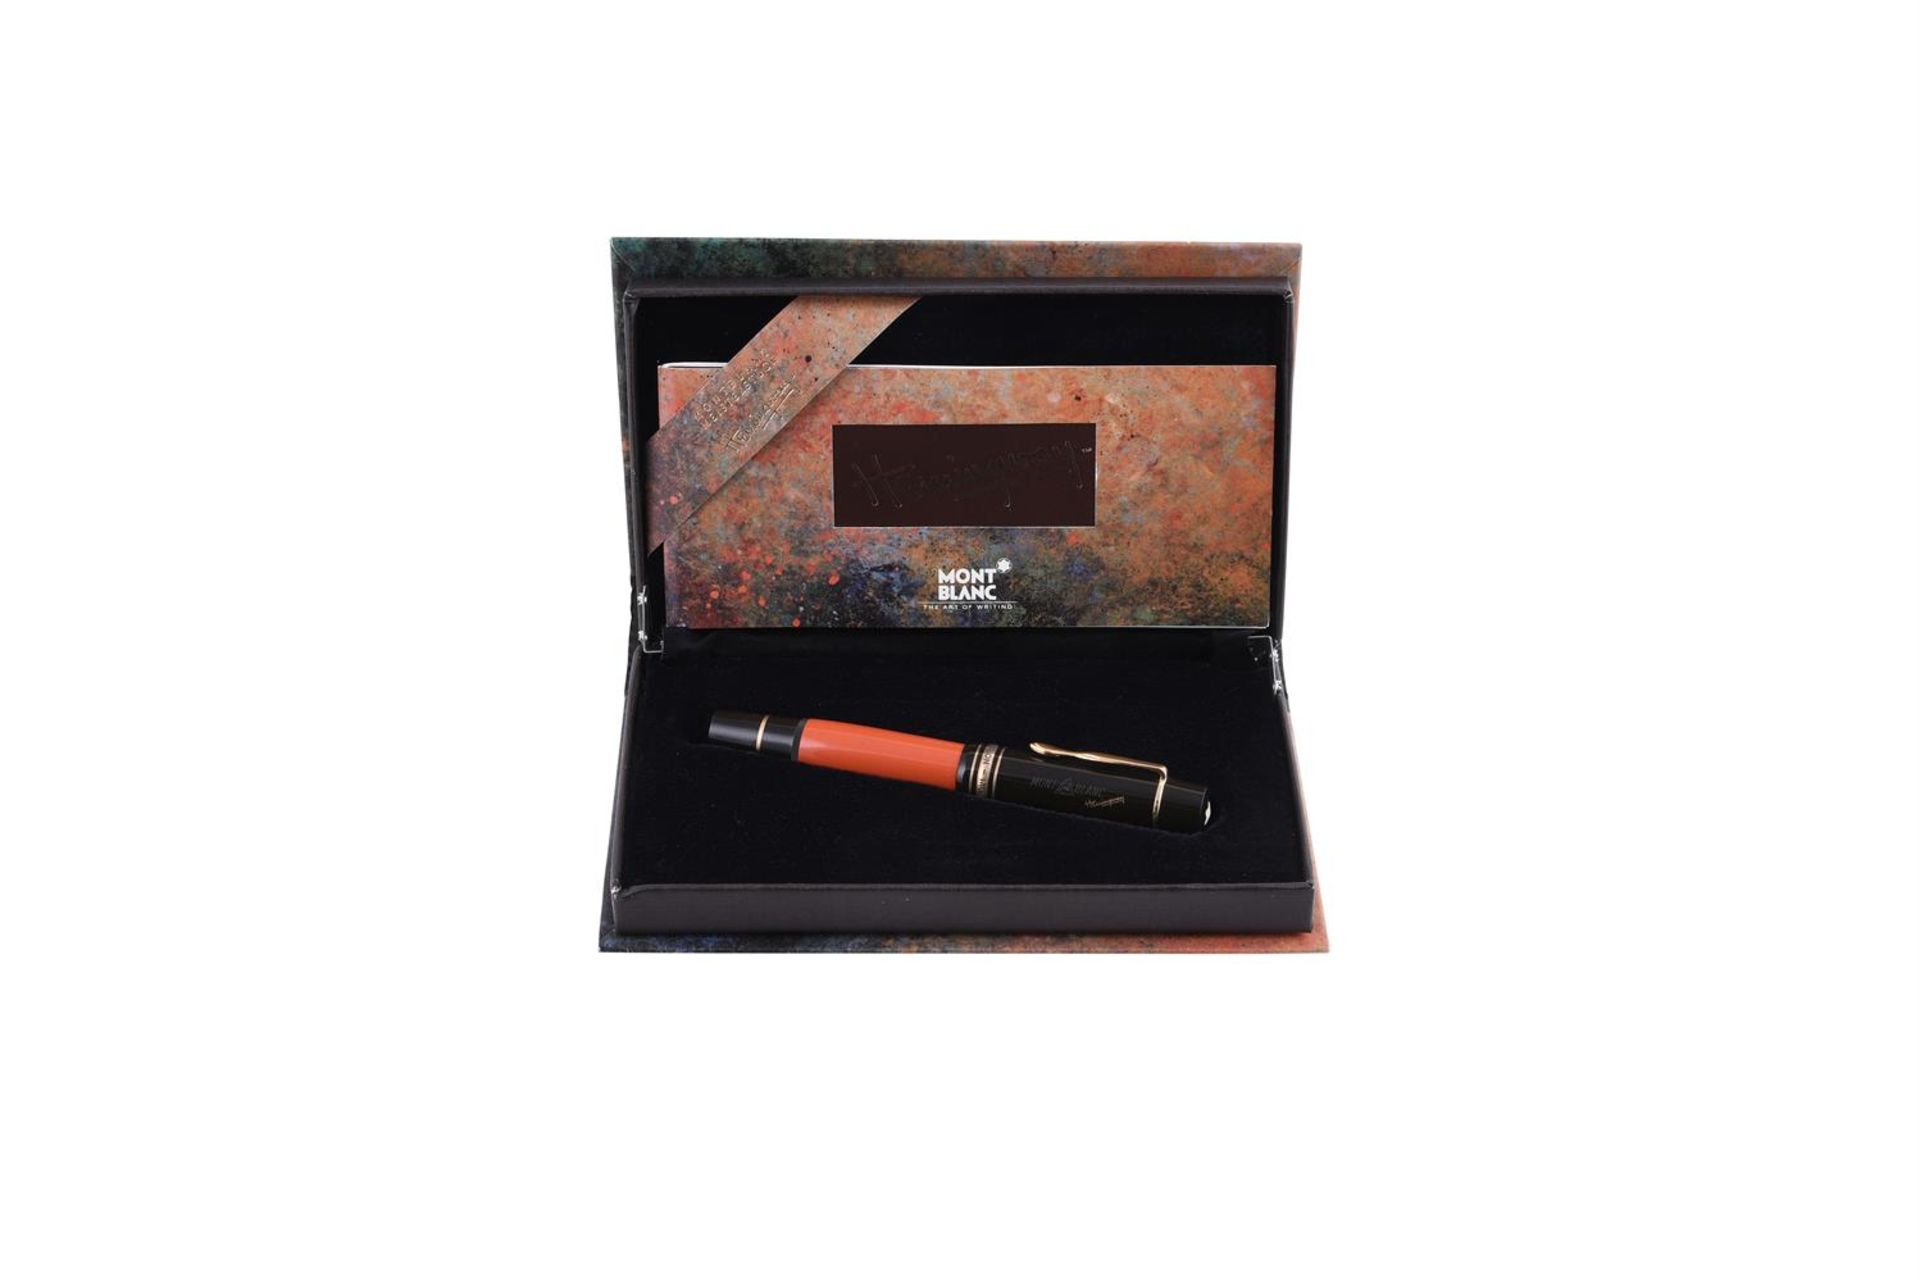 MONTBLANC, WRITERS EDITION, ERNEST HEMINGWAY, A LIMITED EDITION FOUNTAIN PEN, FE2916704 - Image 3 of 3